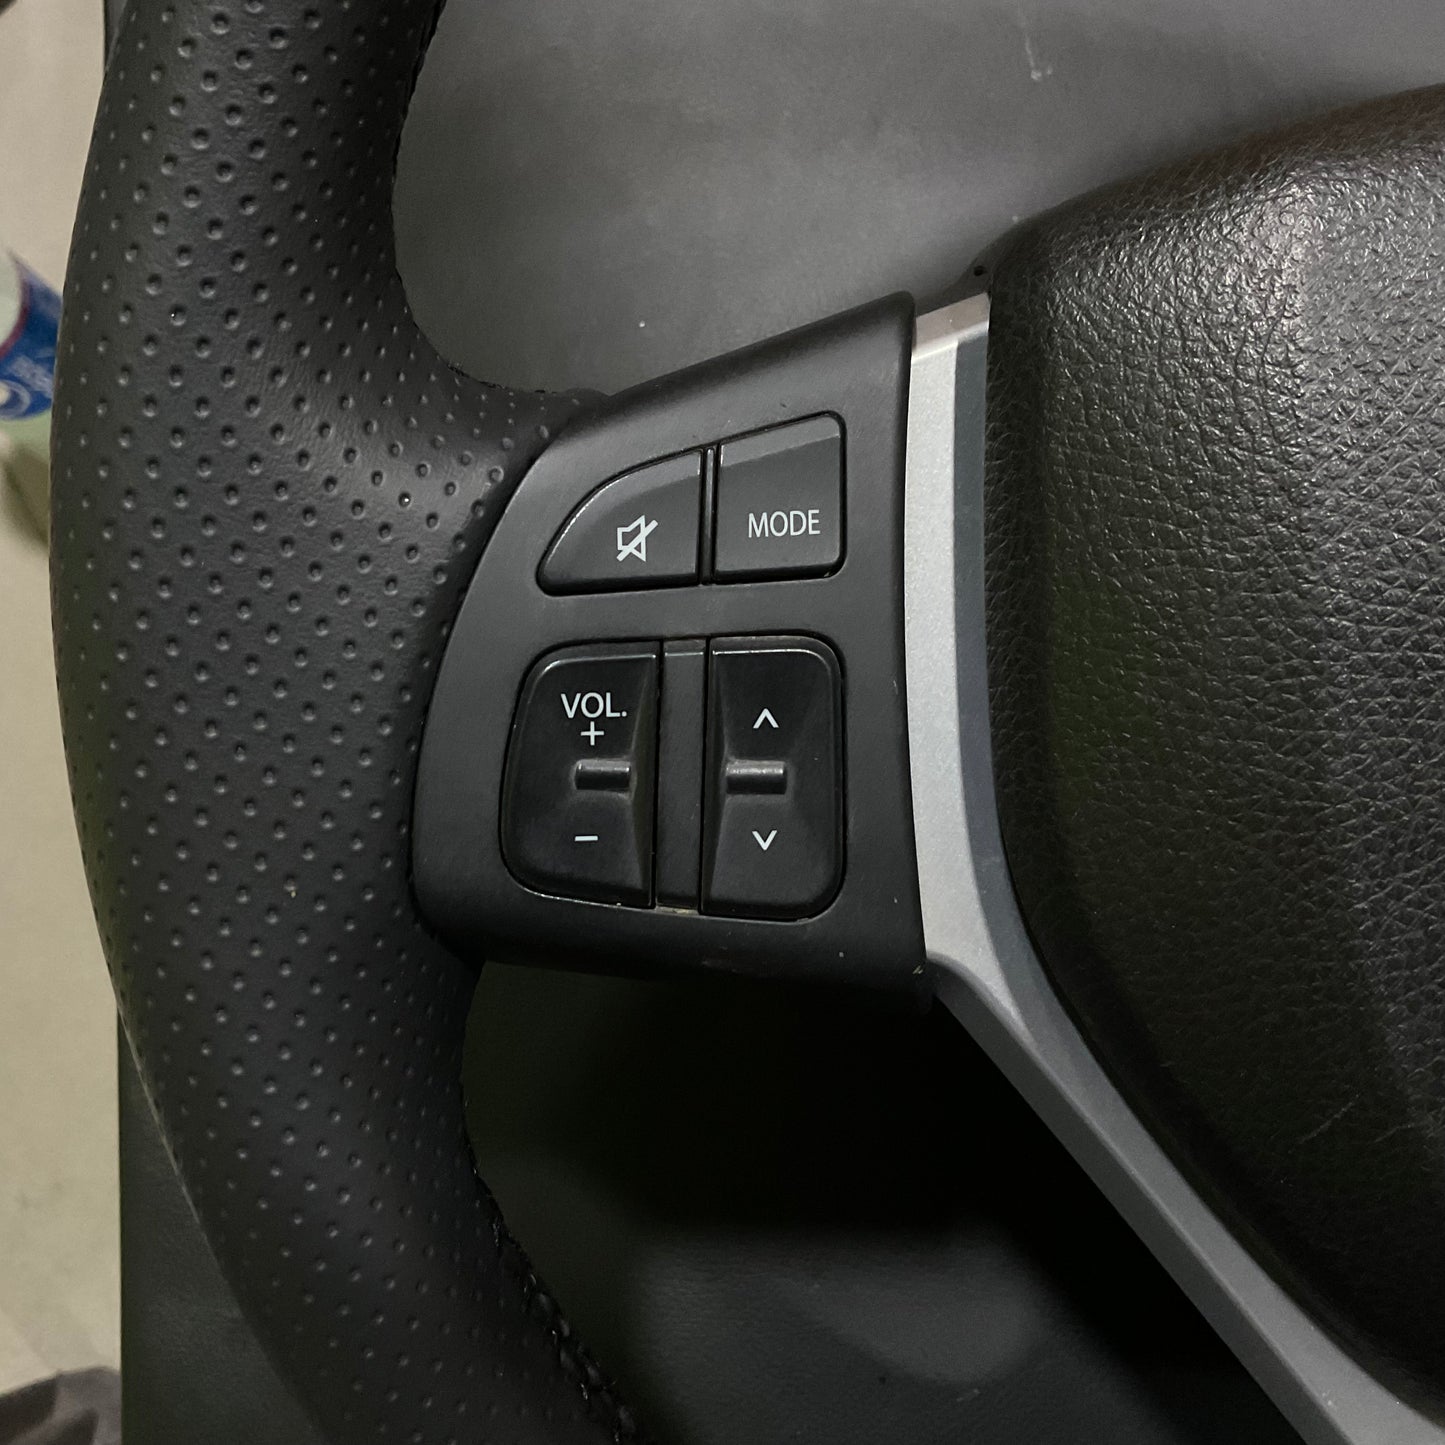 Kabli Steering with Bespoke Steering Cover for New Cultus, New Alto, and Wagon R in Pakistan